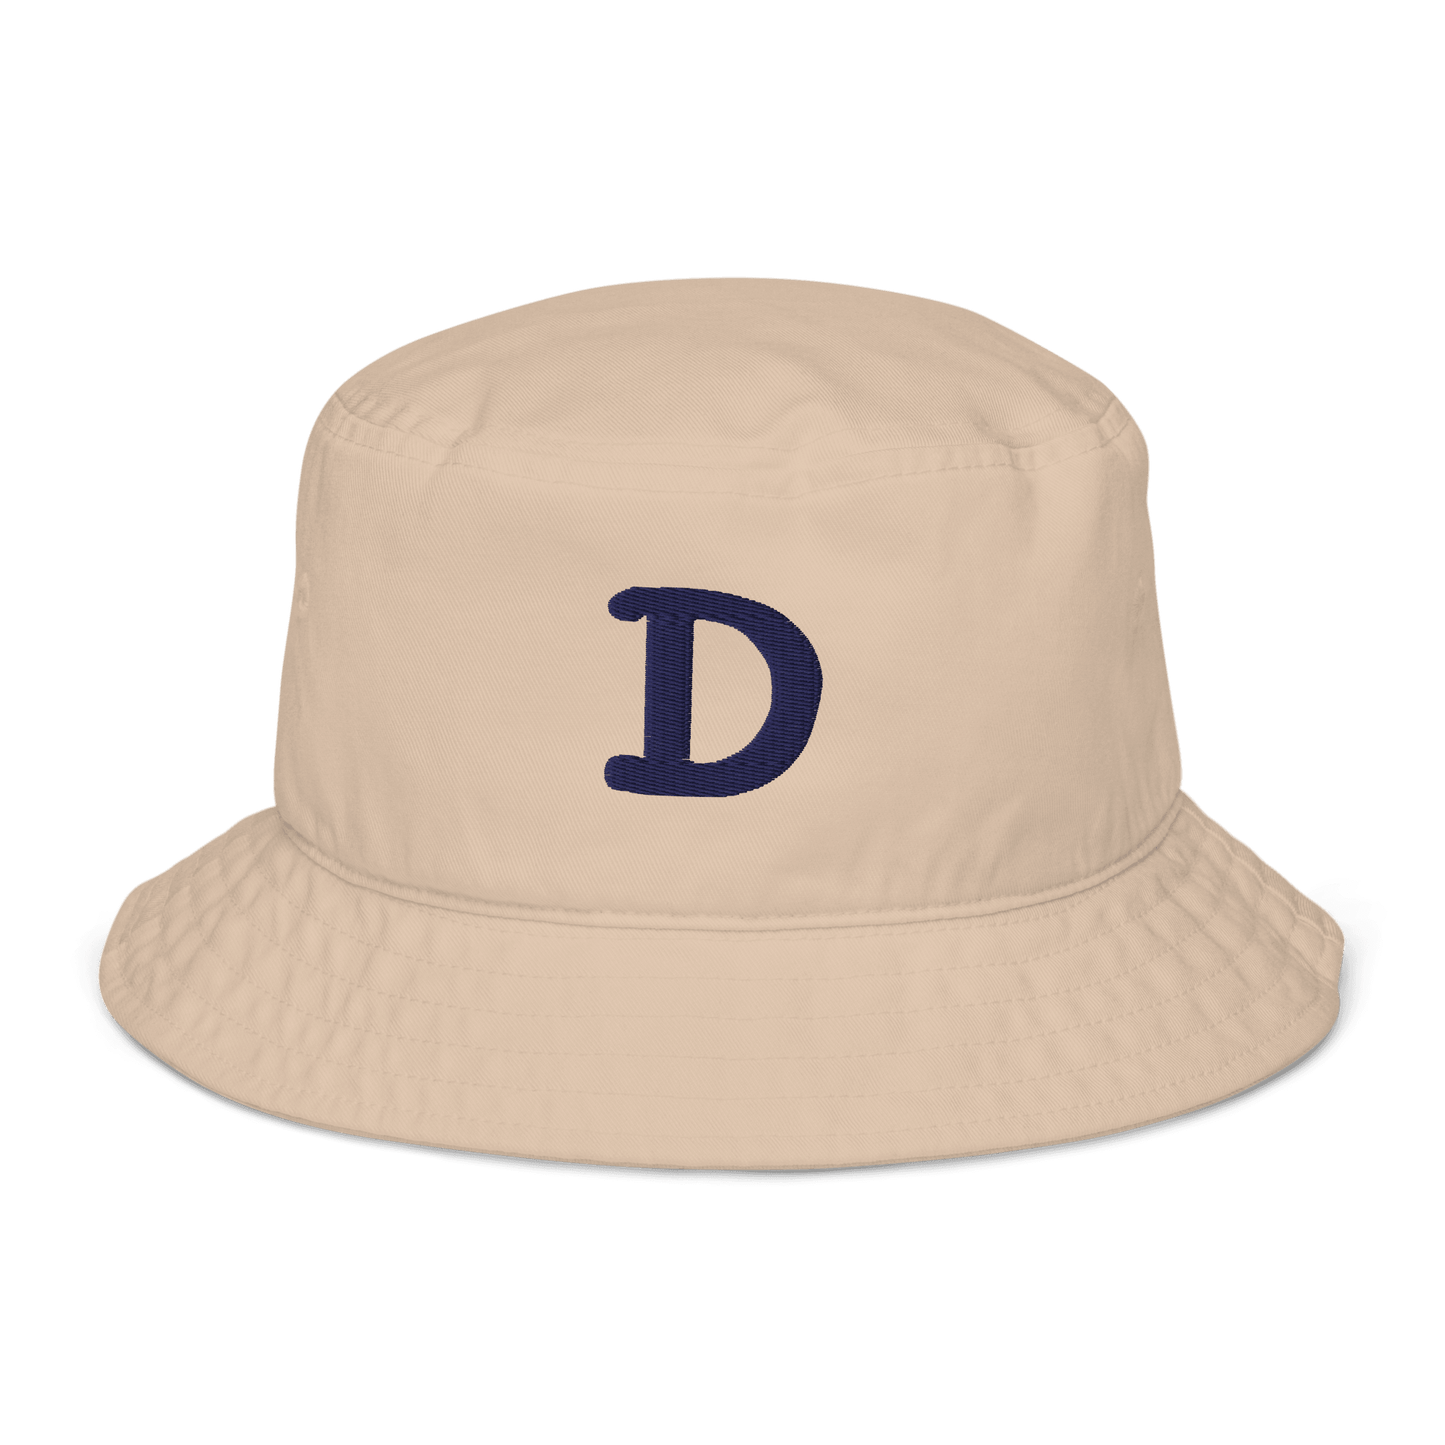 Detroit Old French 'D' Bucket Hat - Circumspice Michigan